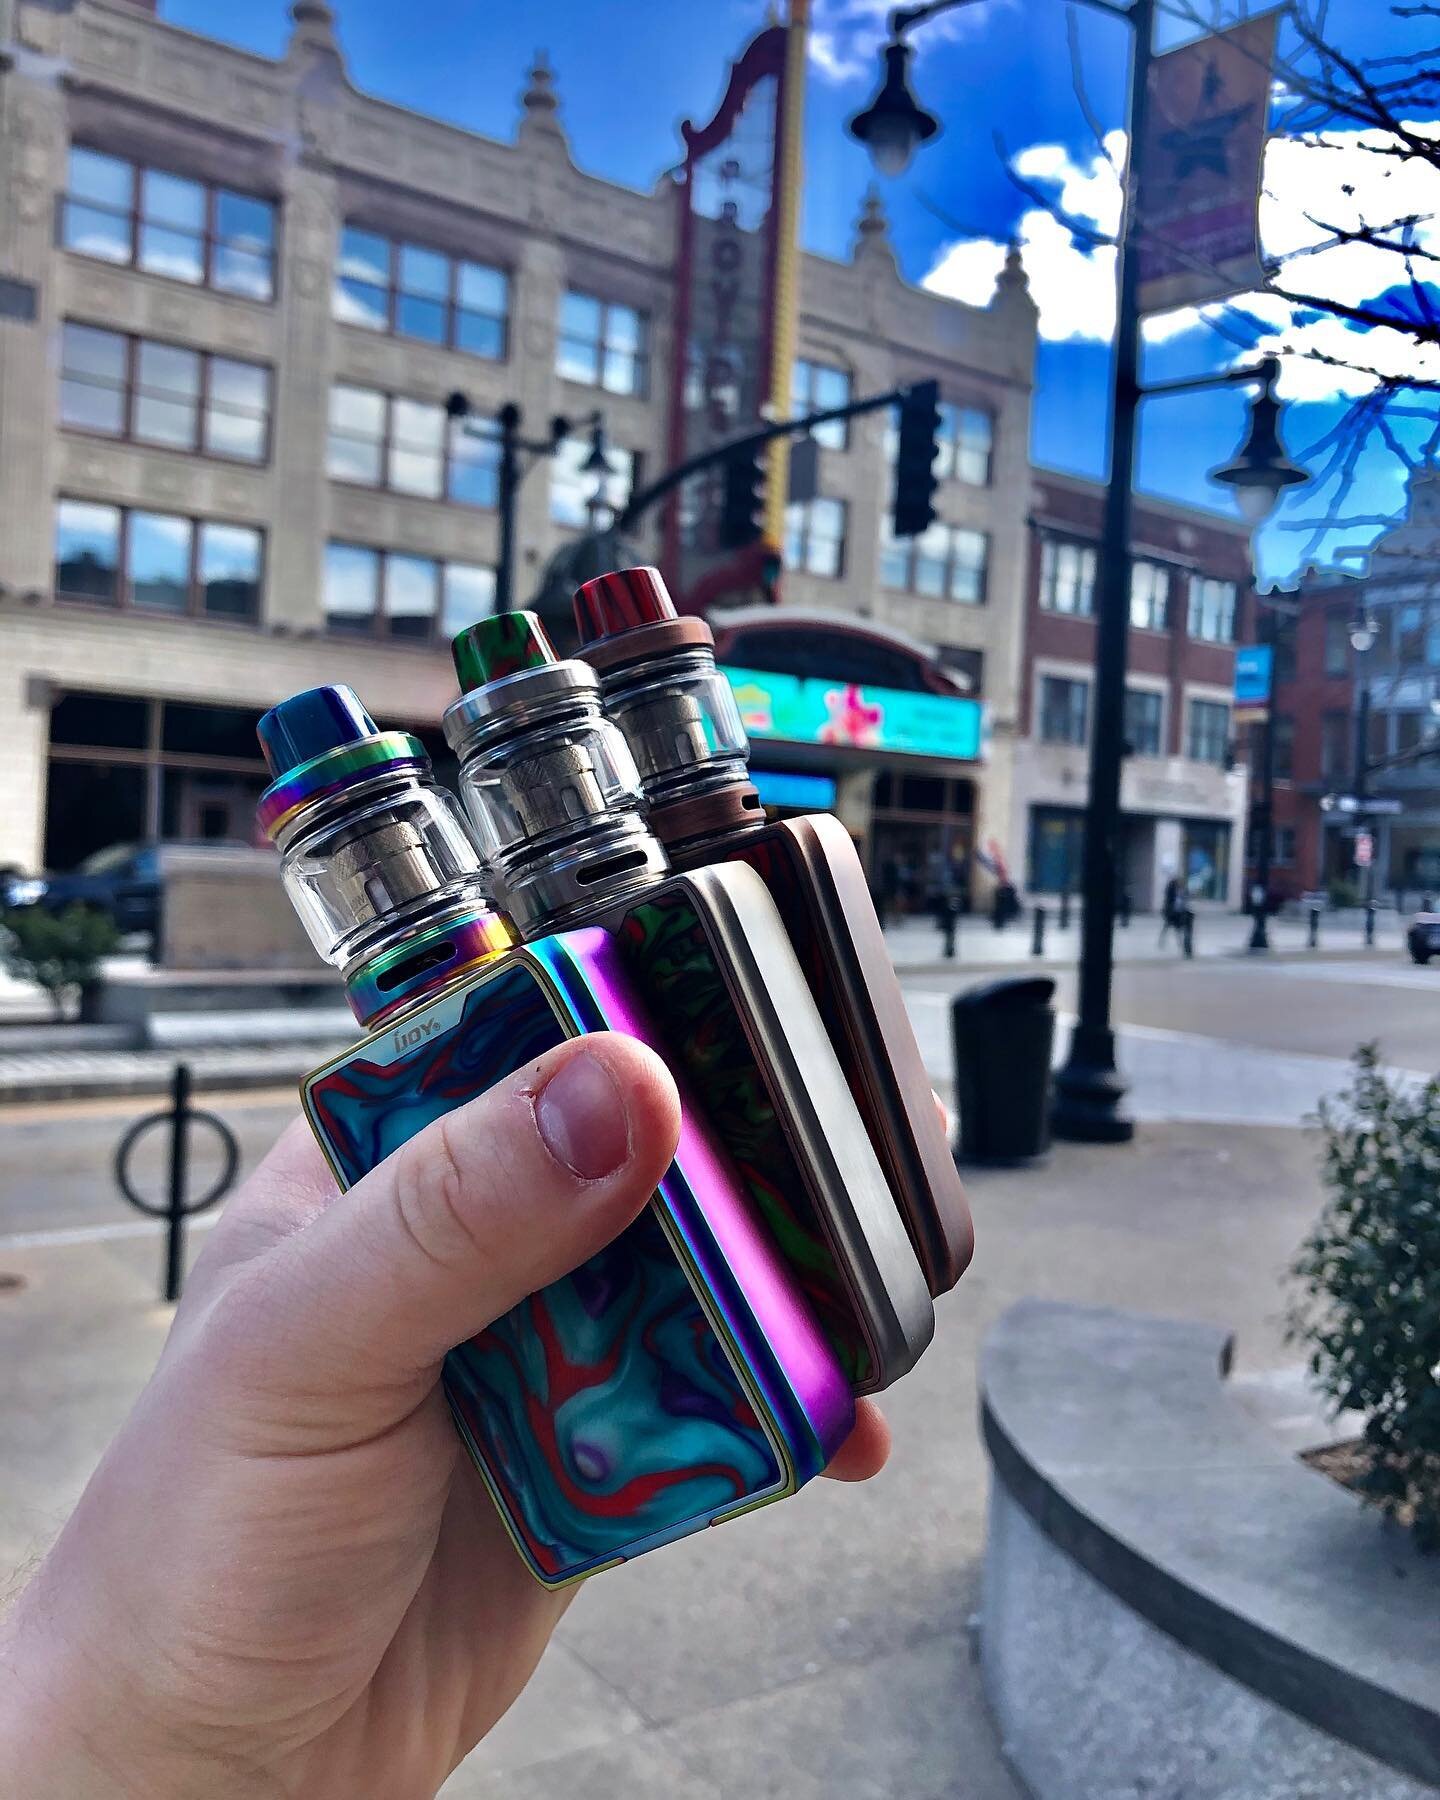 New mod alert 🚨🚨🚨🚨
Now stocked up with the new @ijoyusa shogun jr mod kit with internal batteries and a max wattage of 126! A great vape for beginners and experienced users alike!
&mdash;&mdash;&mdash;&mdash;&mdash;&mdash;&mdash;&mdash;&mdash;&md